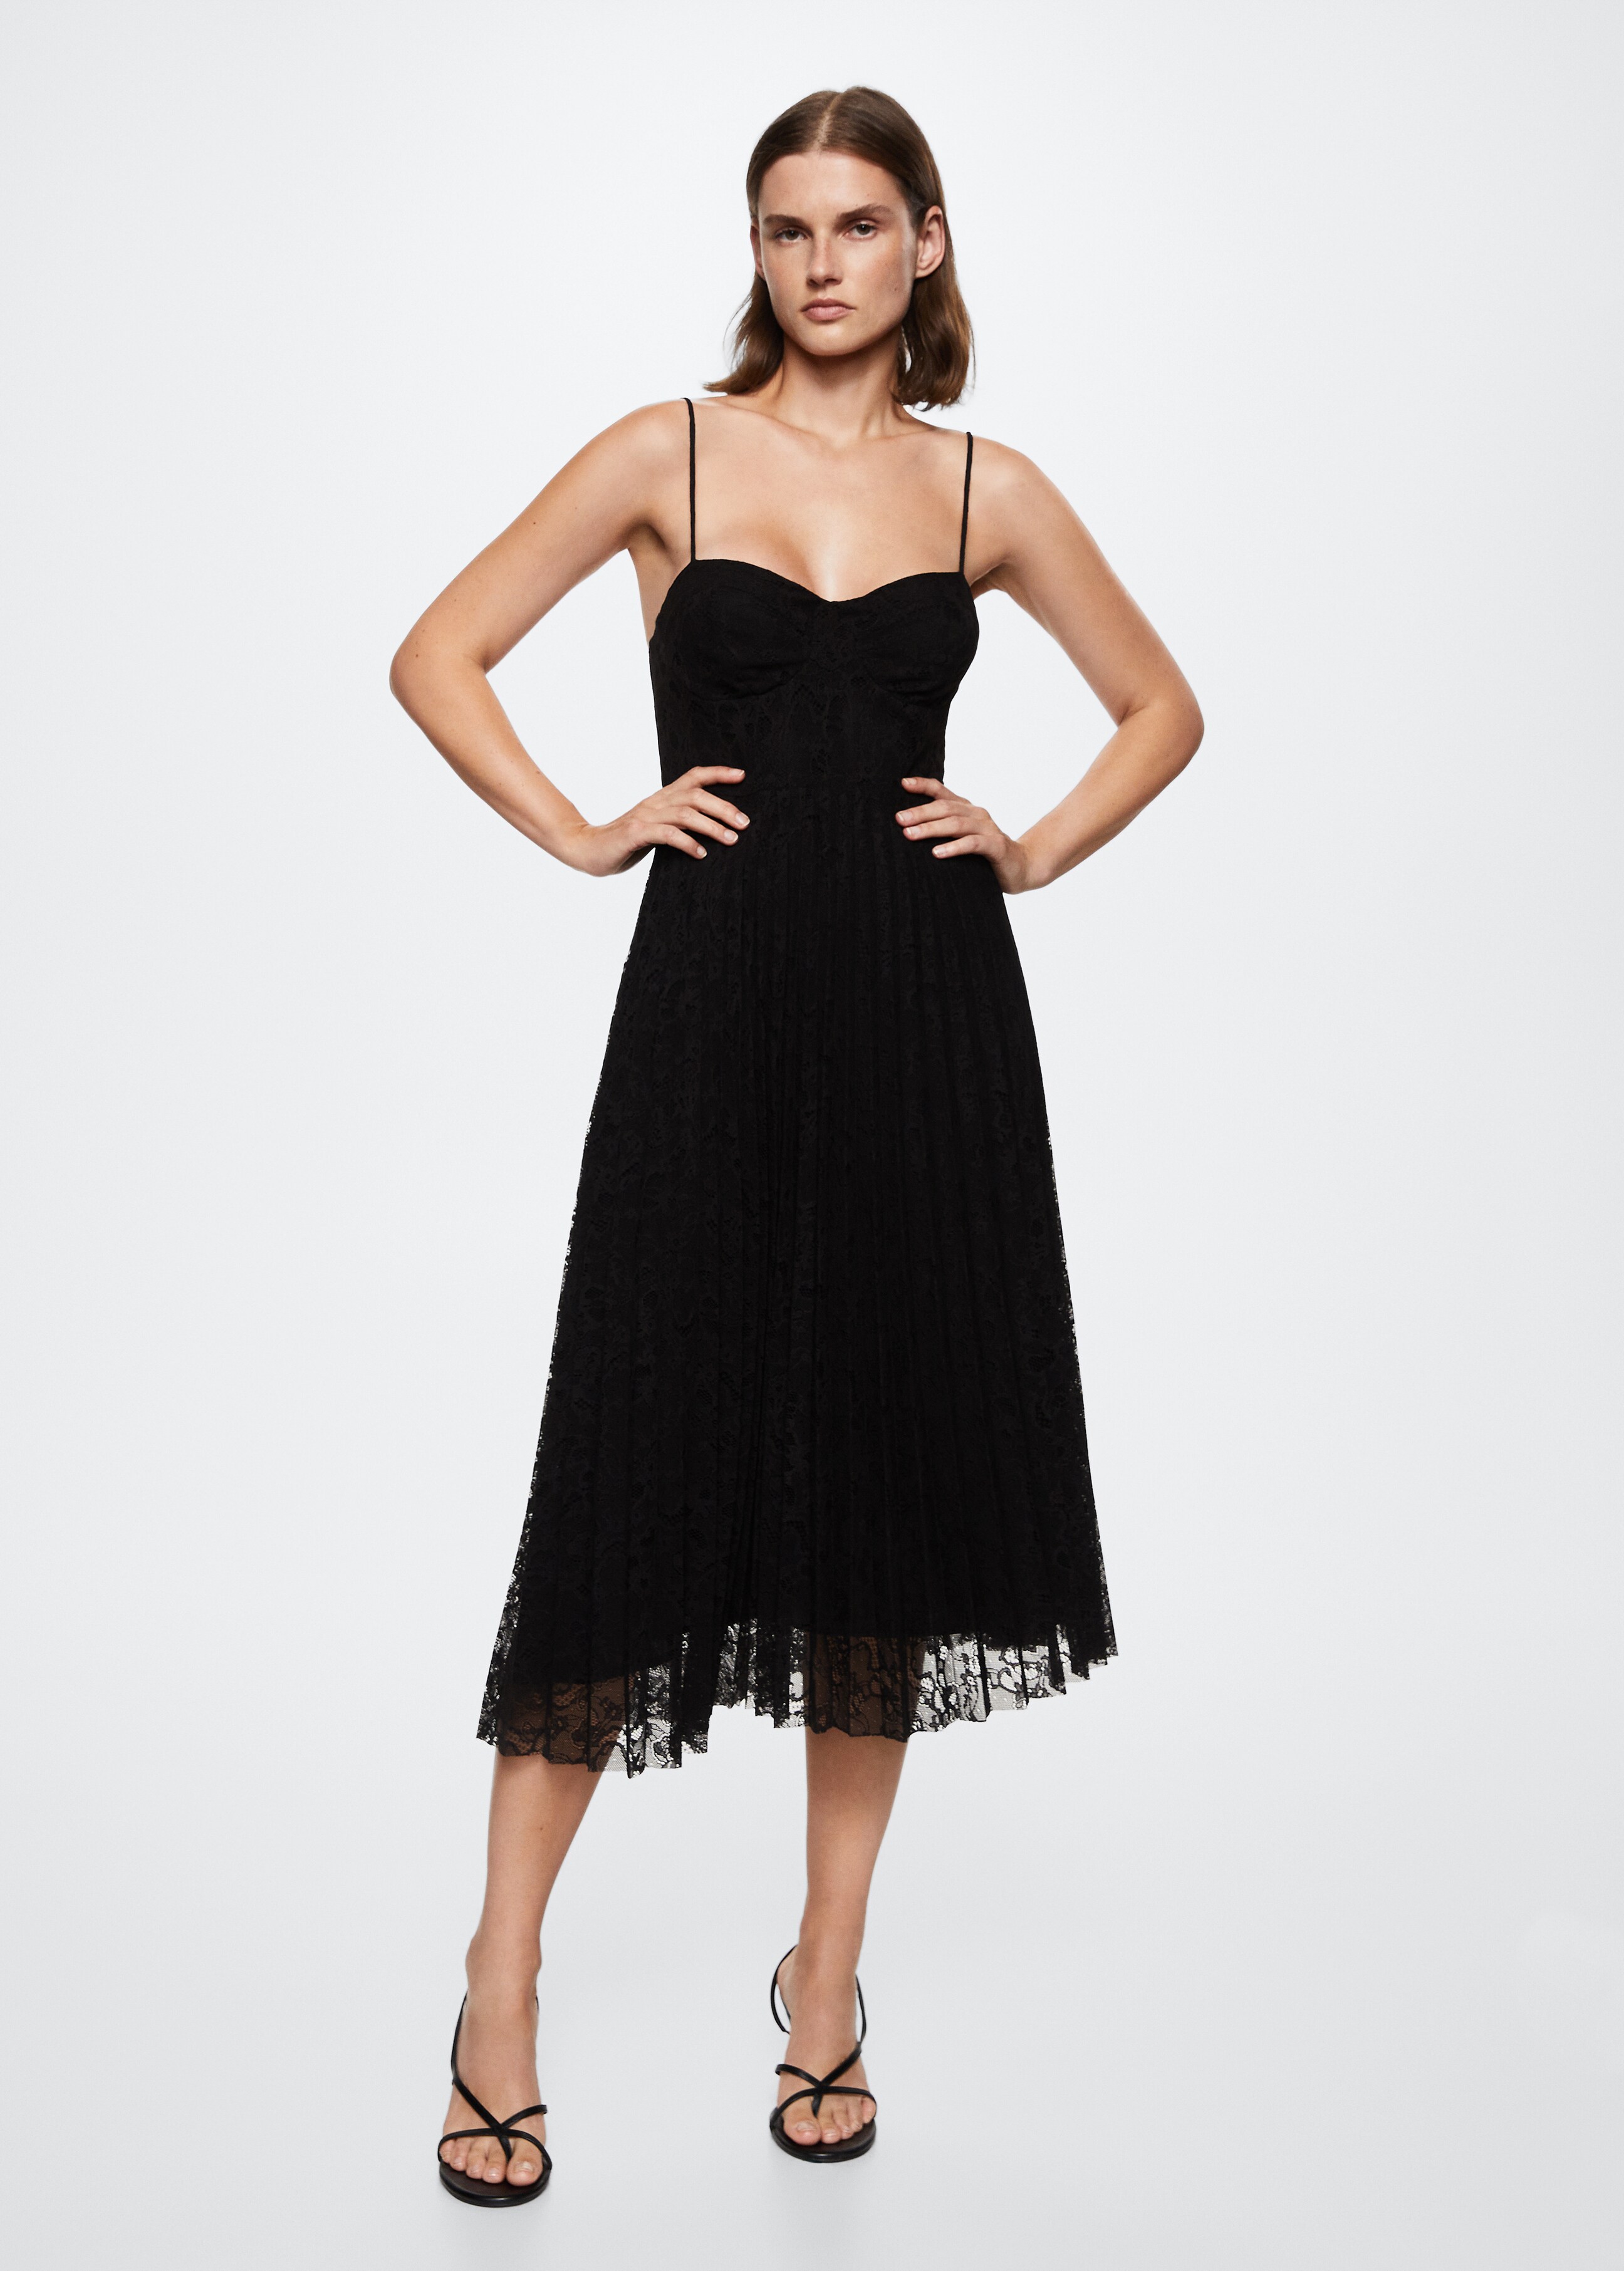 Lace pleated dress - General plane